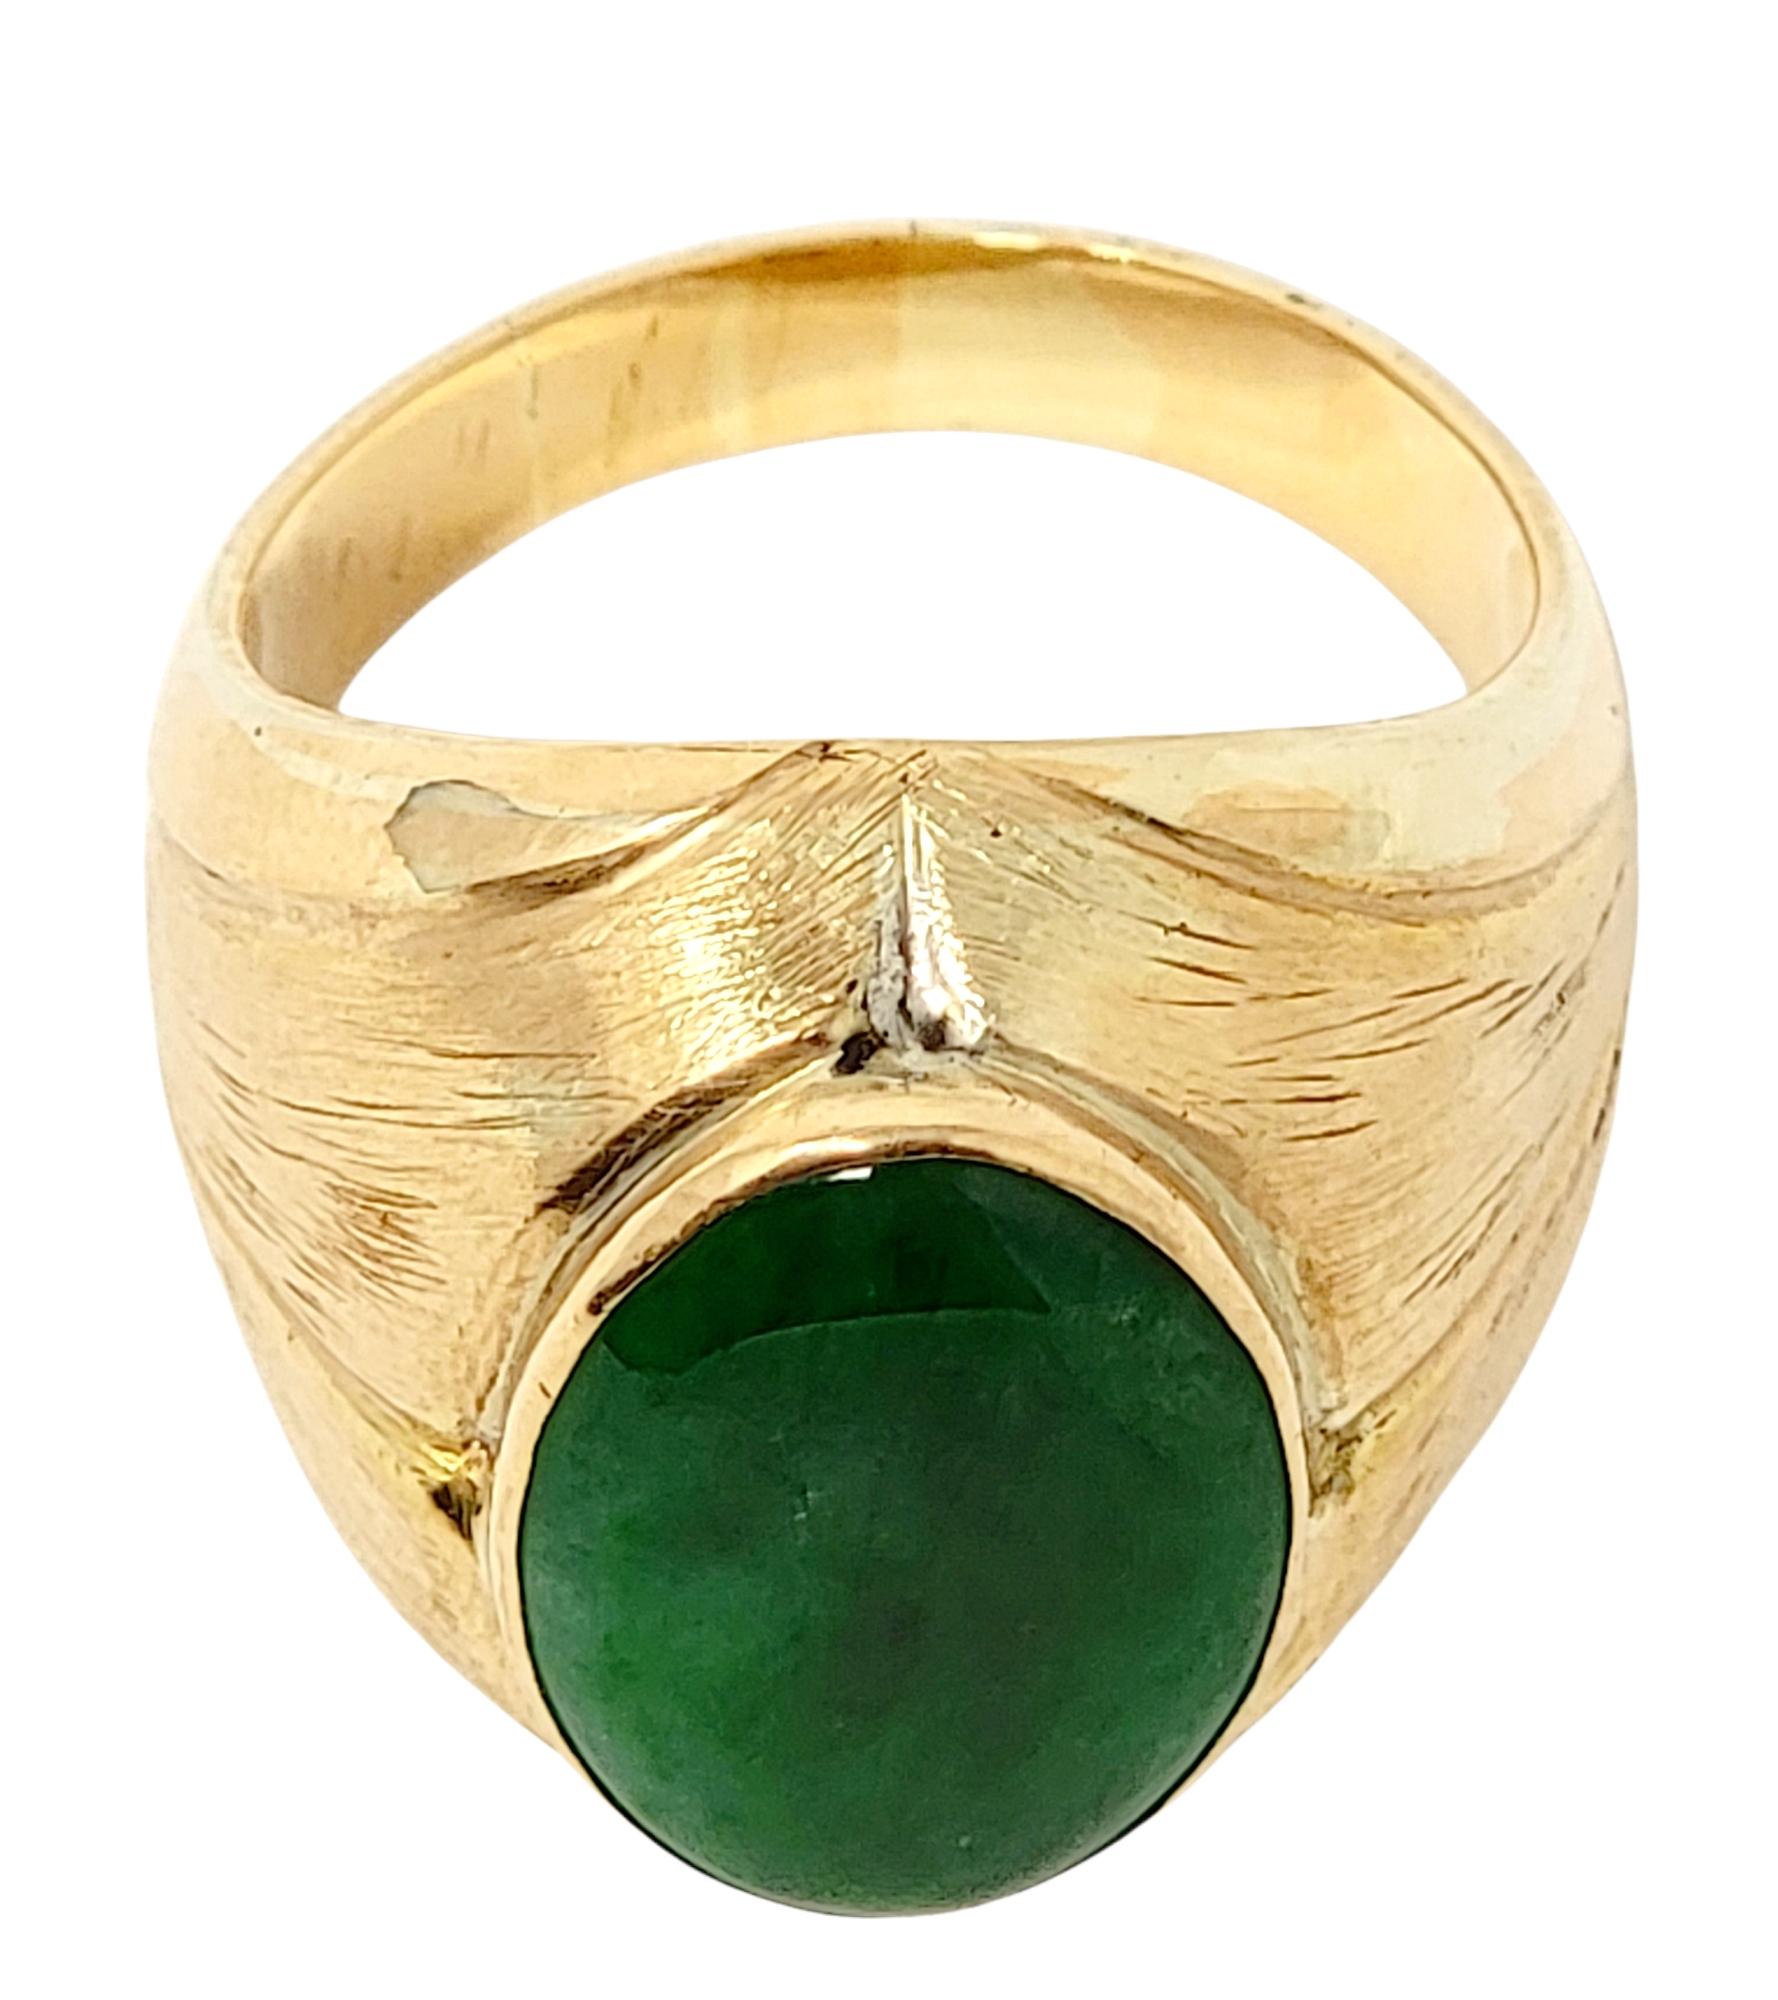 Contemporary 9.70 Carat Solitaire Oval Cabochon Jadeite Men's Ring in 18 Karat Yellow Gold